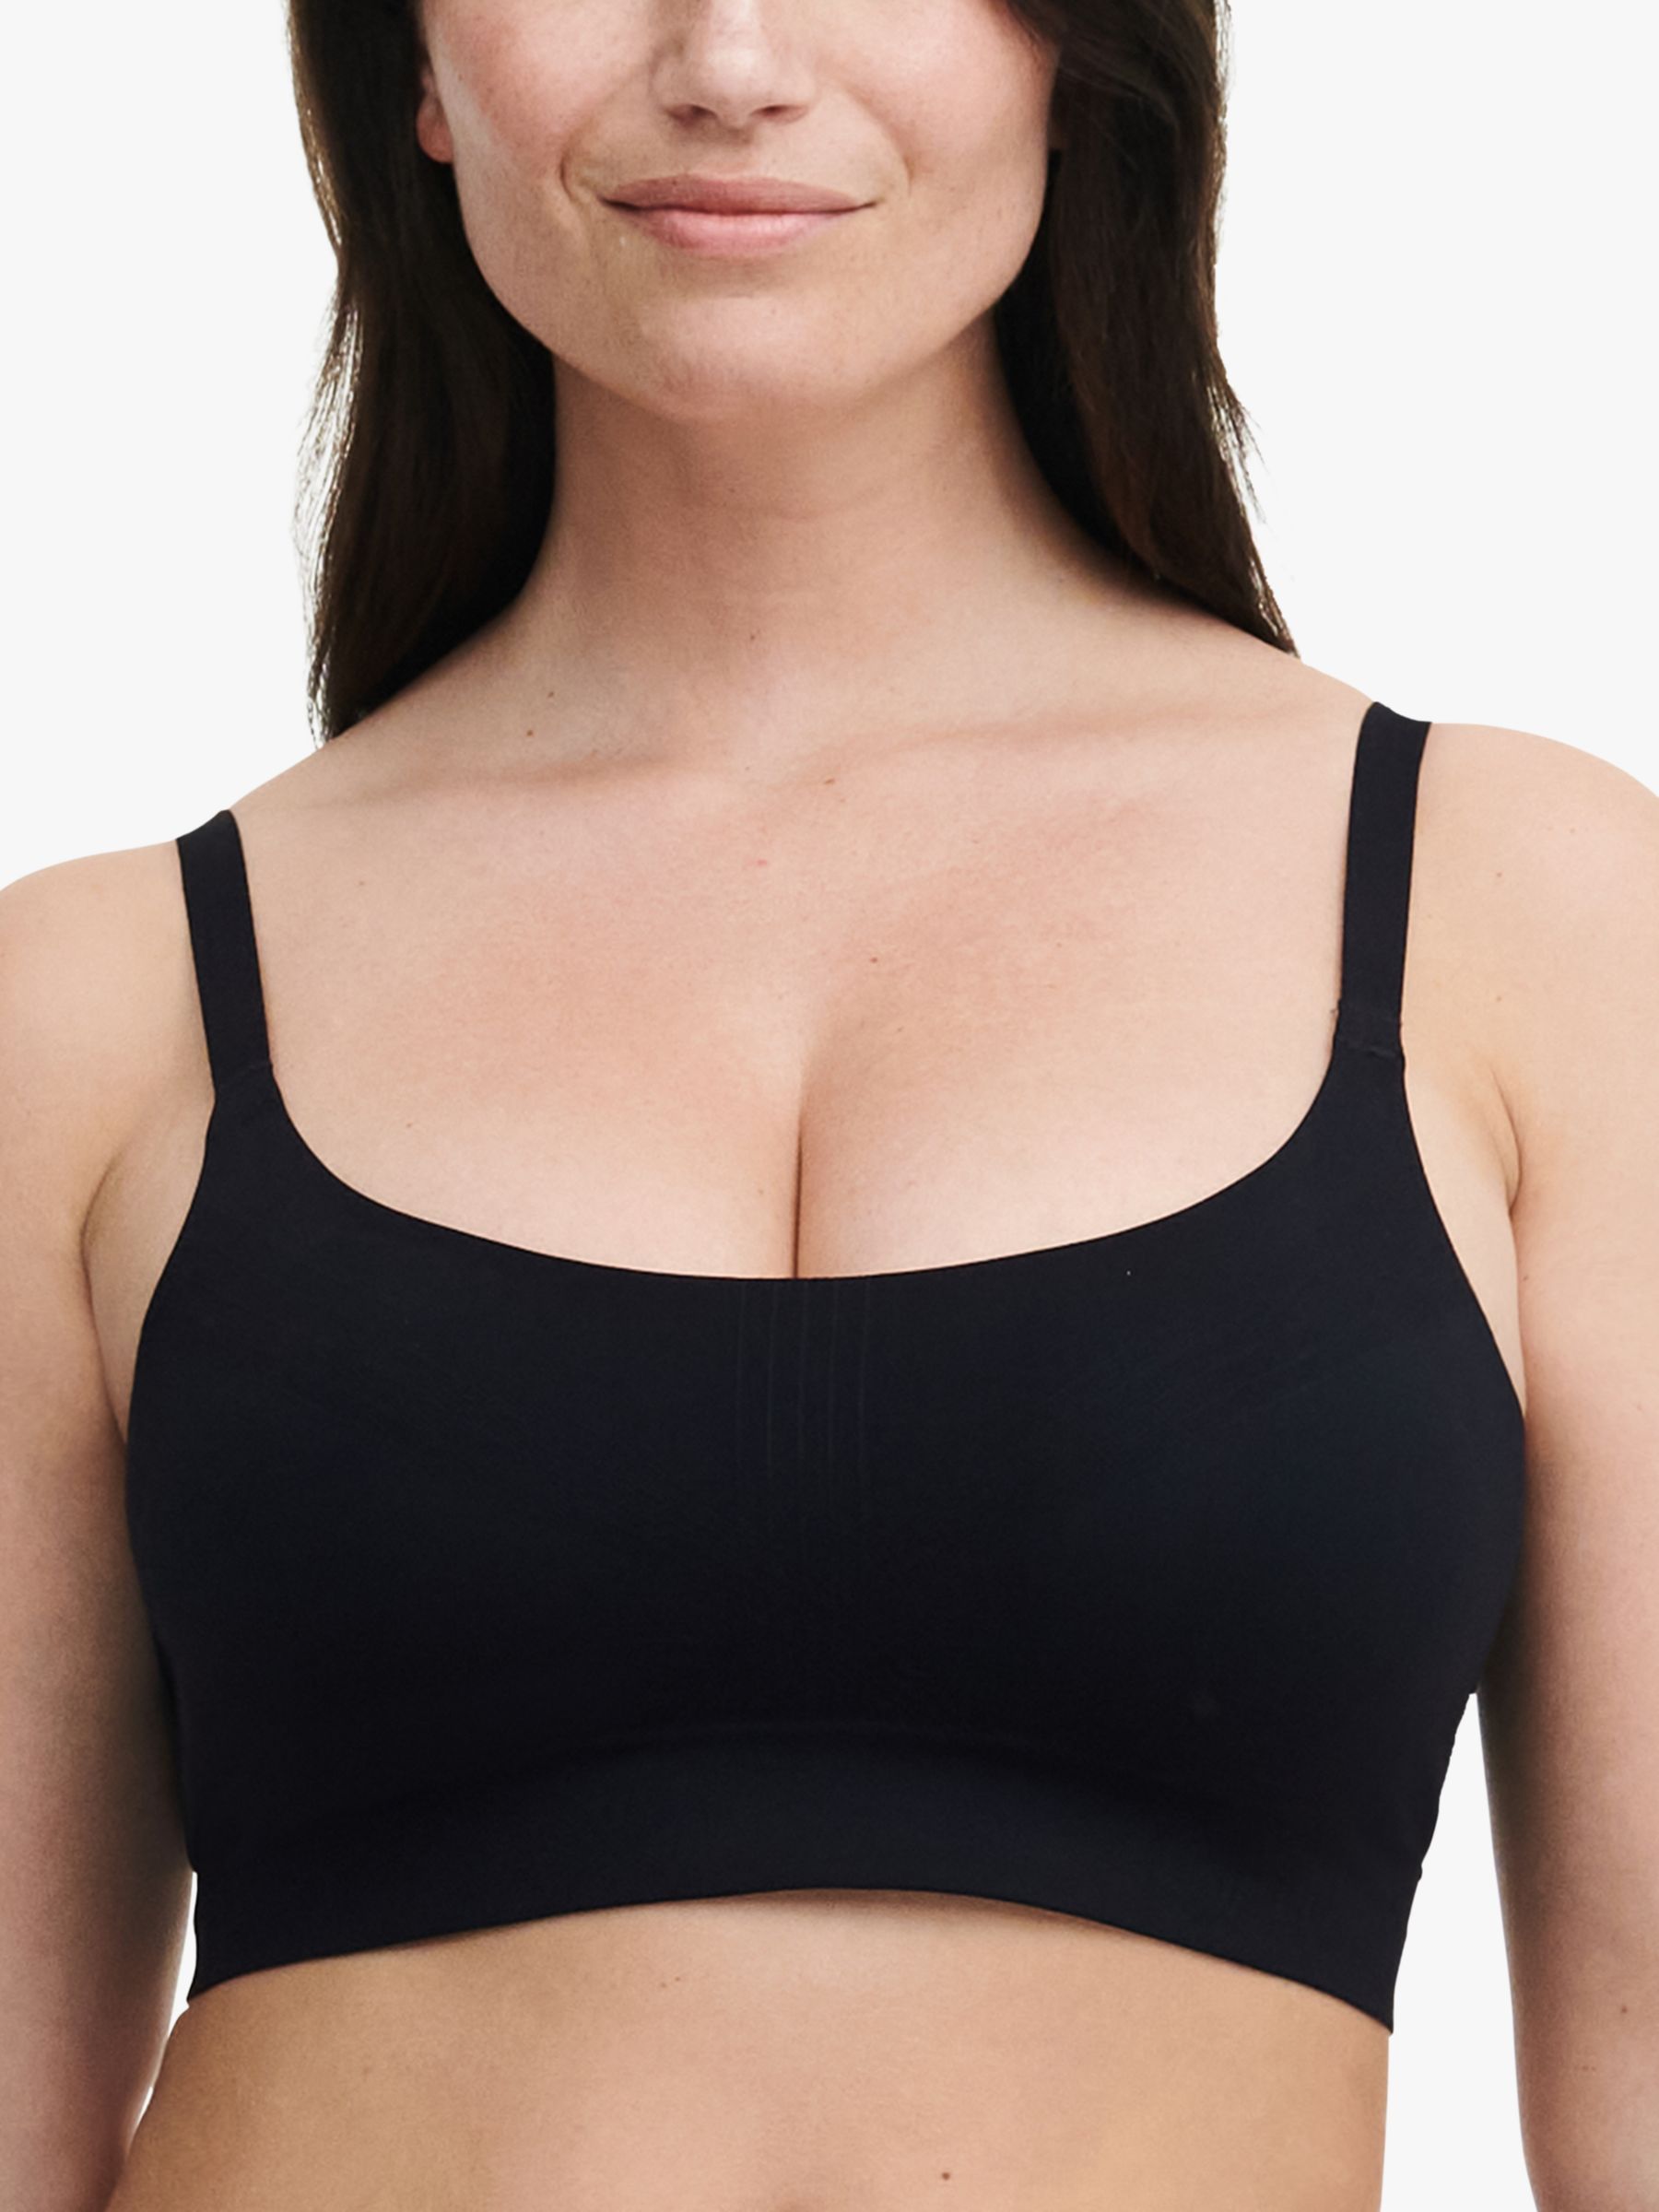  Customer reviews: FORLEST Comfortable Seamless Bras for Women  No Underwire, Padded Bralettes for Women with Support